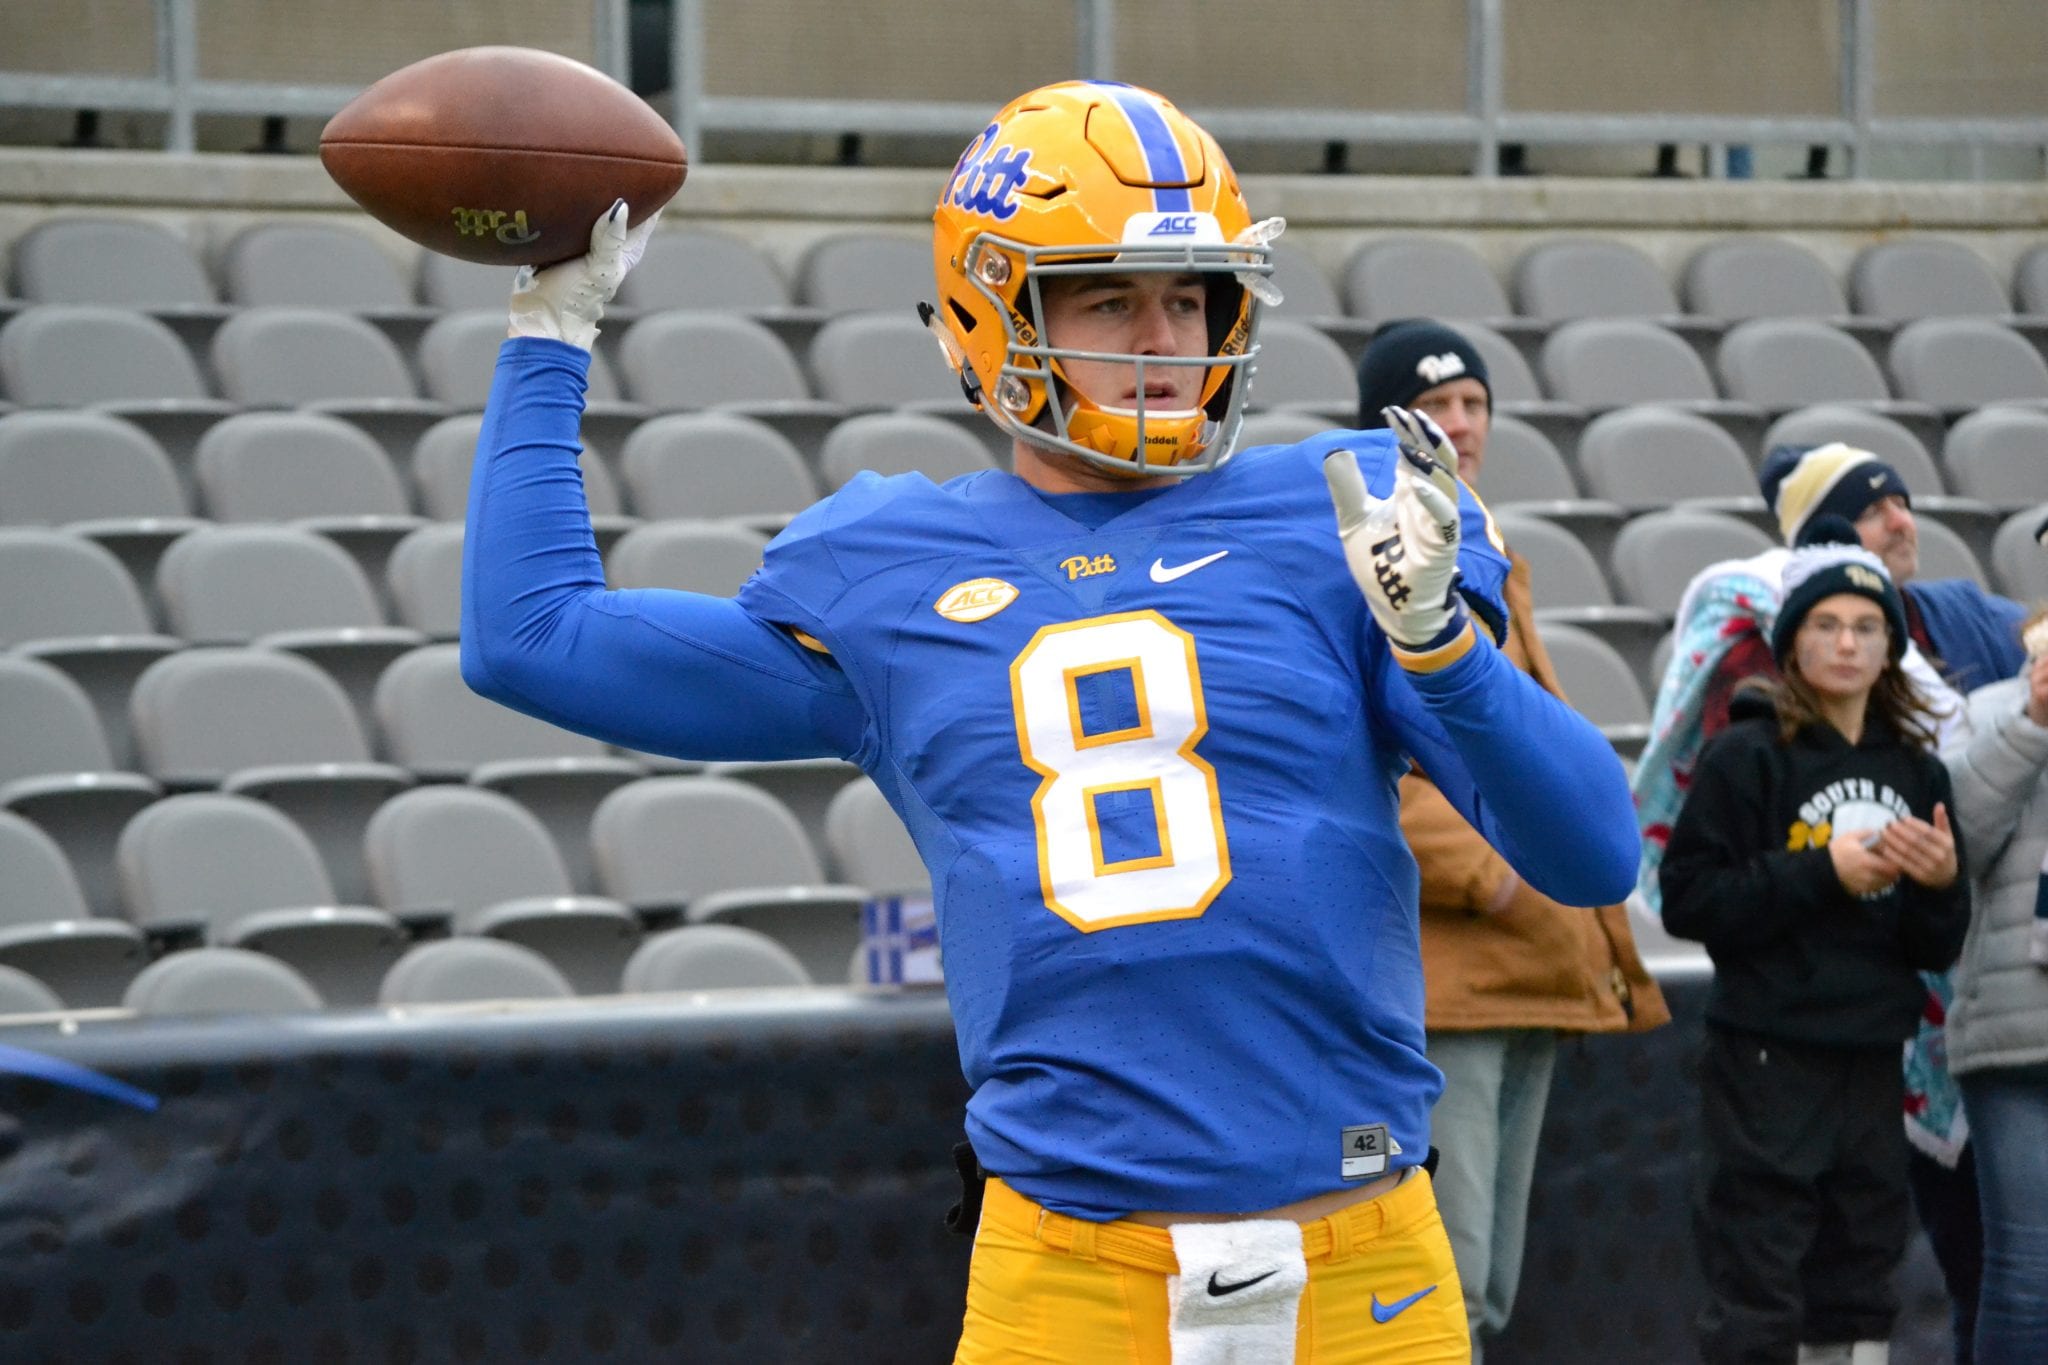 Pitt Passing Game Looking for Fixes, not Drastic Change | Pittsburgh Sports Now